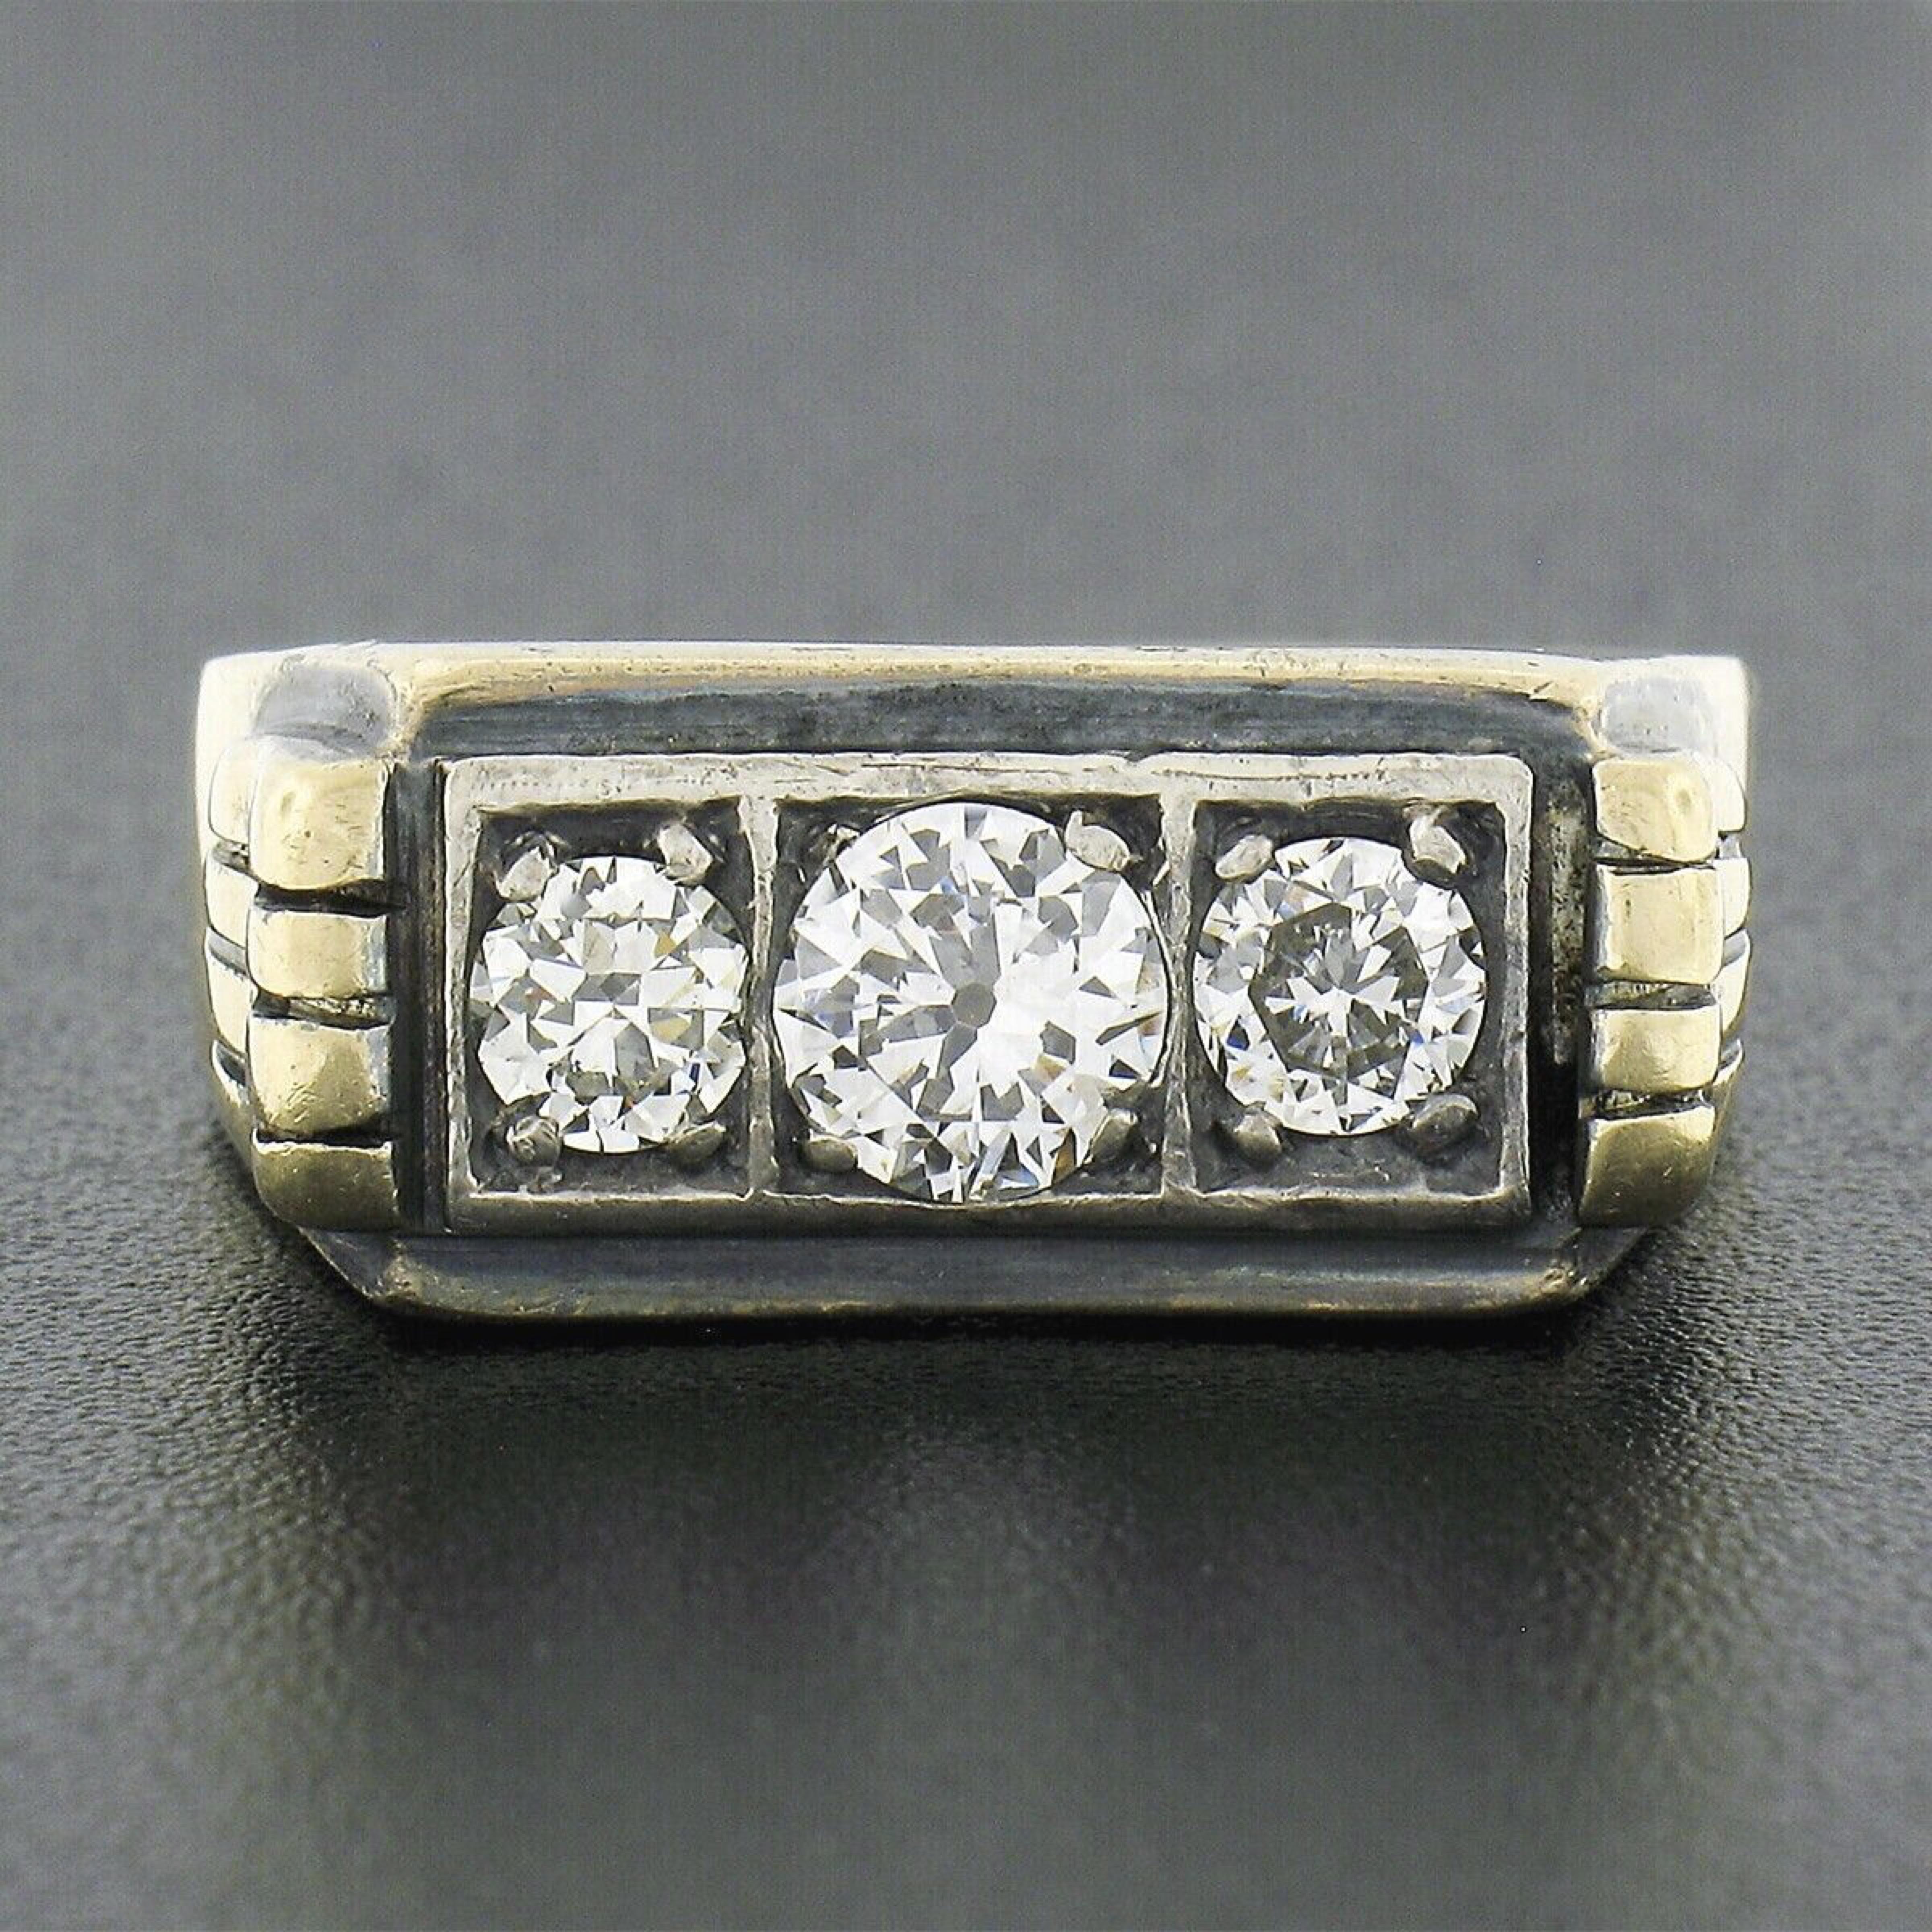 This incredible men's antique band ring was crafted in solid 14k yellow gold and features 3 fine quality old European cut diamonds which are individually pave set in square and rectangular settings across its top, totaling approximately 1.20 carats